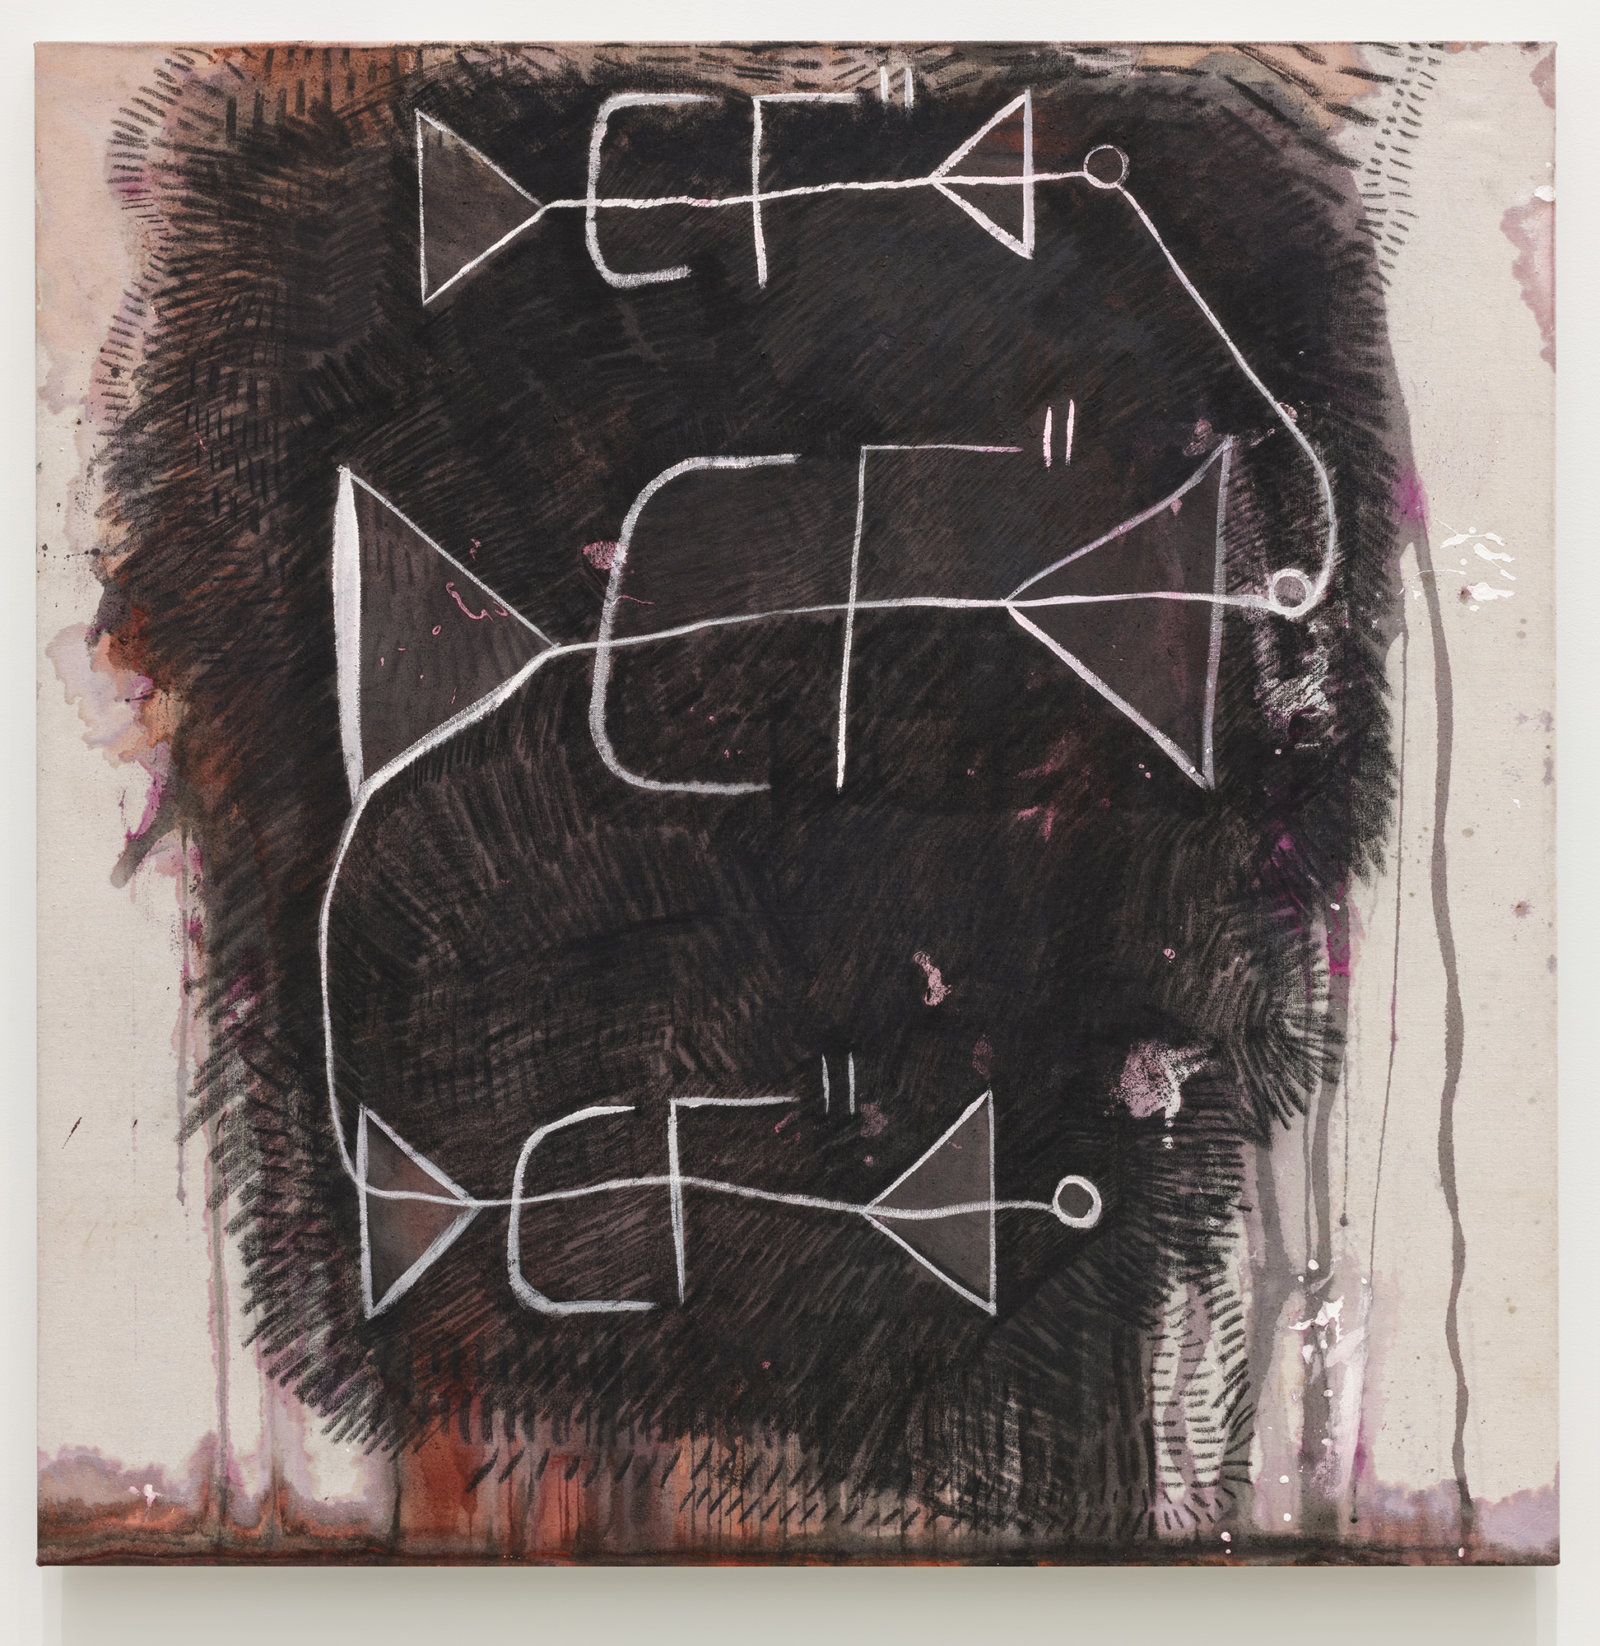 Duane Linklater, colonial anxieties, can make a song?, 2021, sumac, cochineal dye, charcoal, house paint on canvas, 48 x 48 in. (122 x 122 cm)